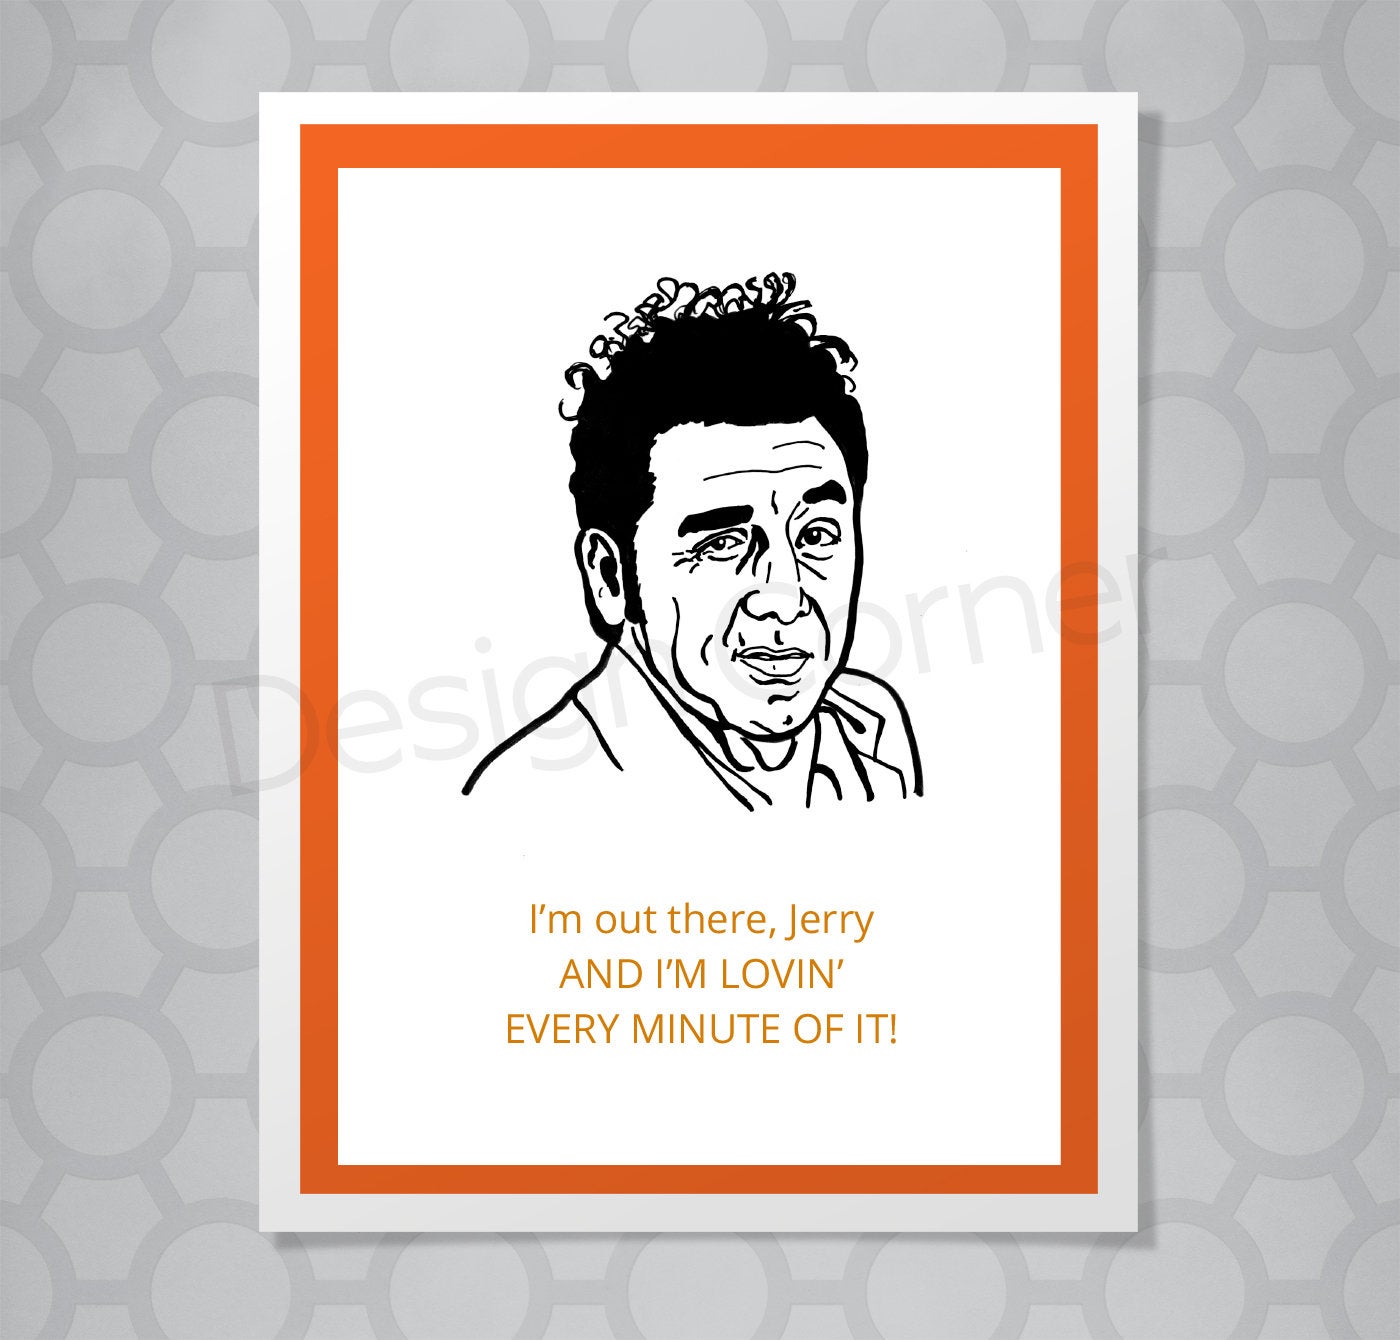 Greeting card with illustration of Seinfeld's Kramer. Caption says "I'm out there and I'm lovin' every minute of it!"